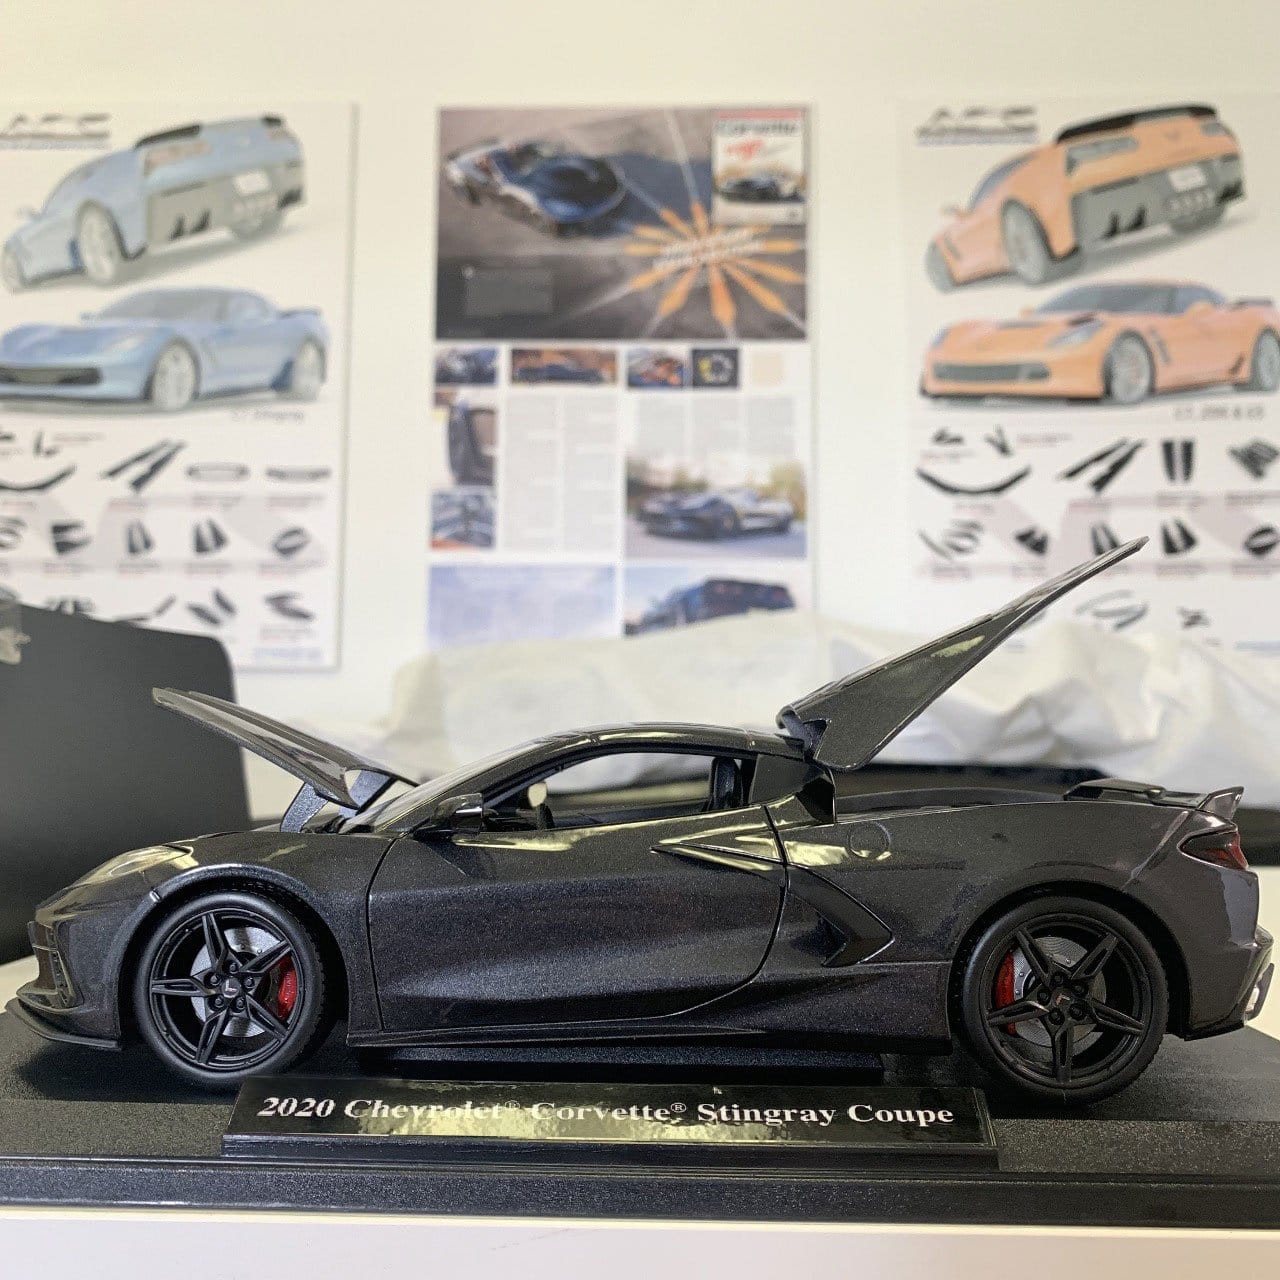 2020 Die Cast Corvette Stingray in Black, Red, or White - Z51 Equipped with CFZ Spoiler and Mirrors, Splitter and Rockers Spears, Coupe Body Style - SKU 50-4-073